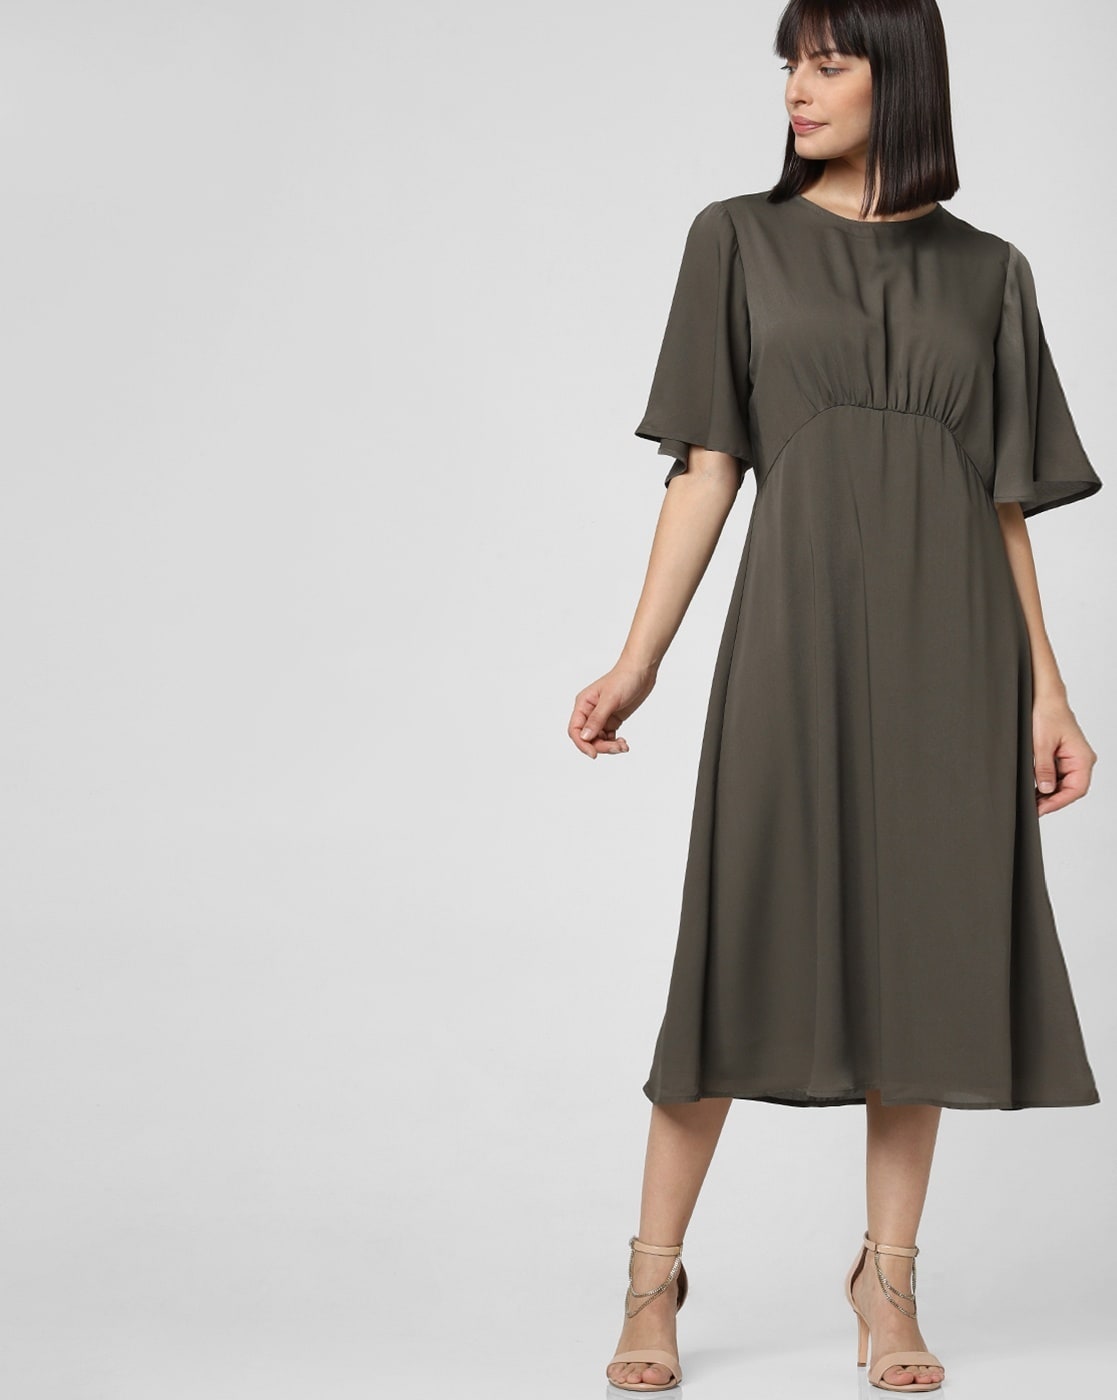 Buy Olive Green Dresses for Women by ...